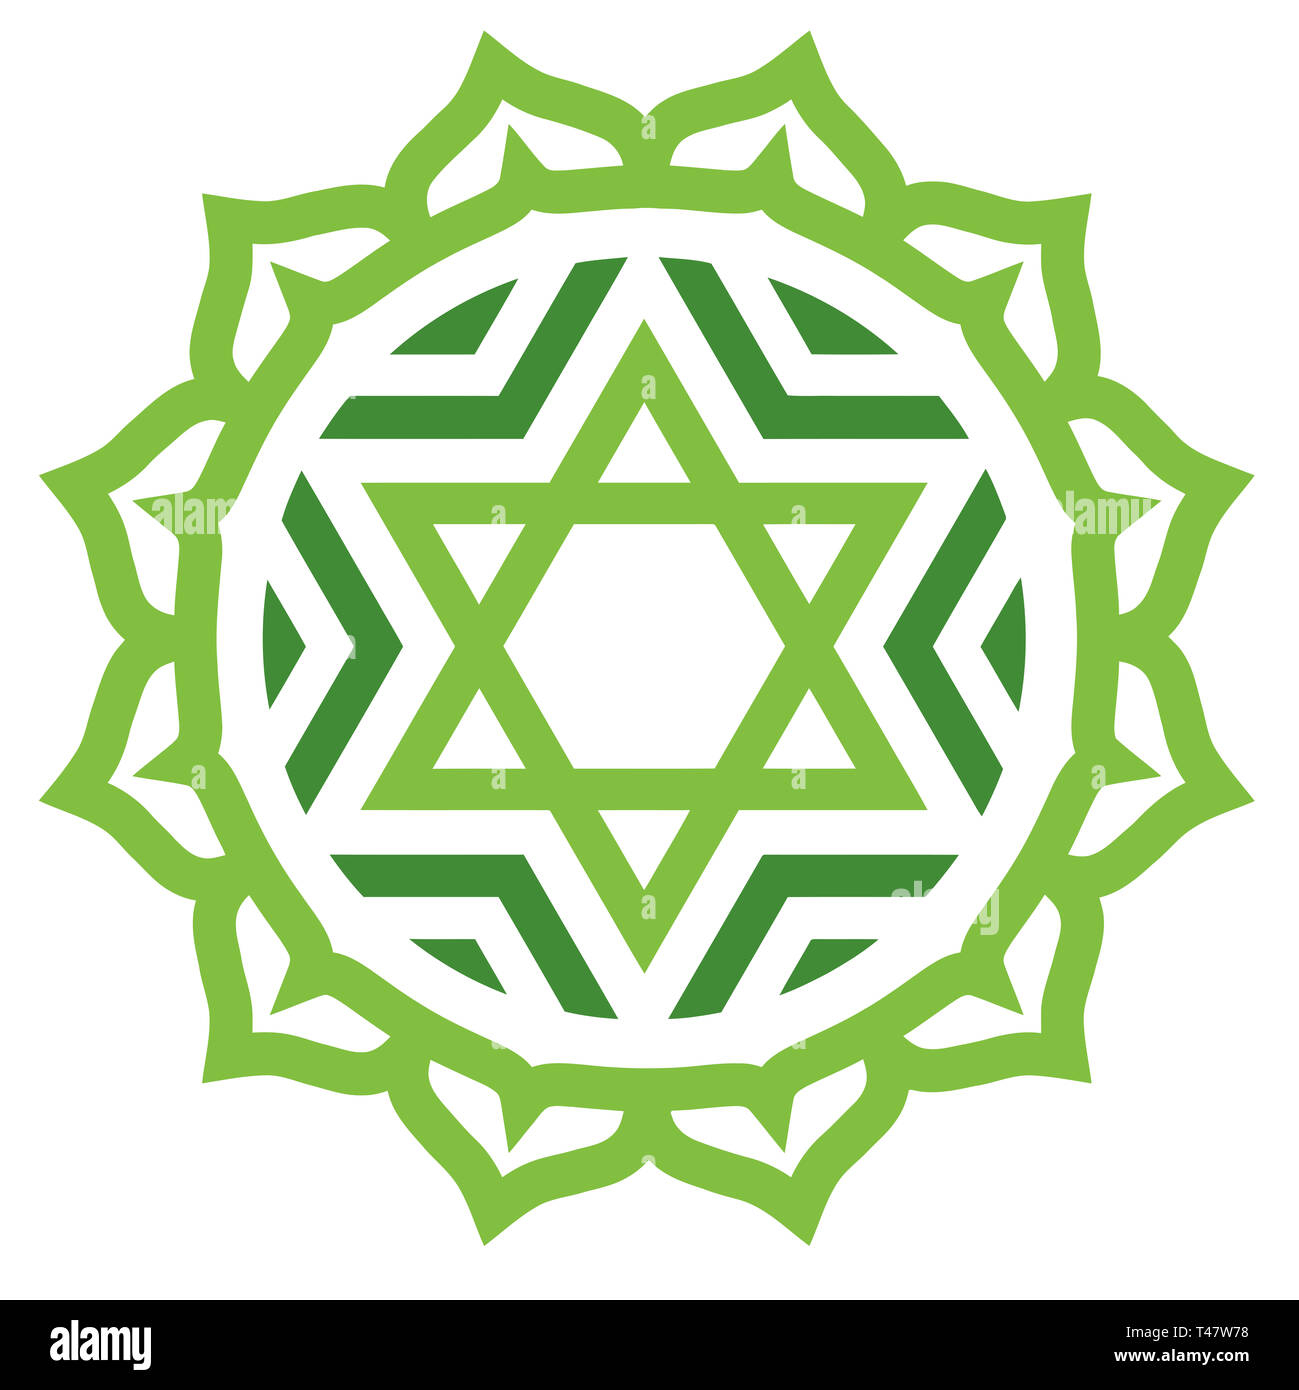 Anahata chakra design Stock Vector by ©Den.the.Grate@gmail.com